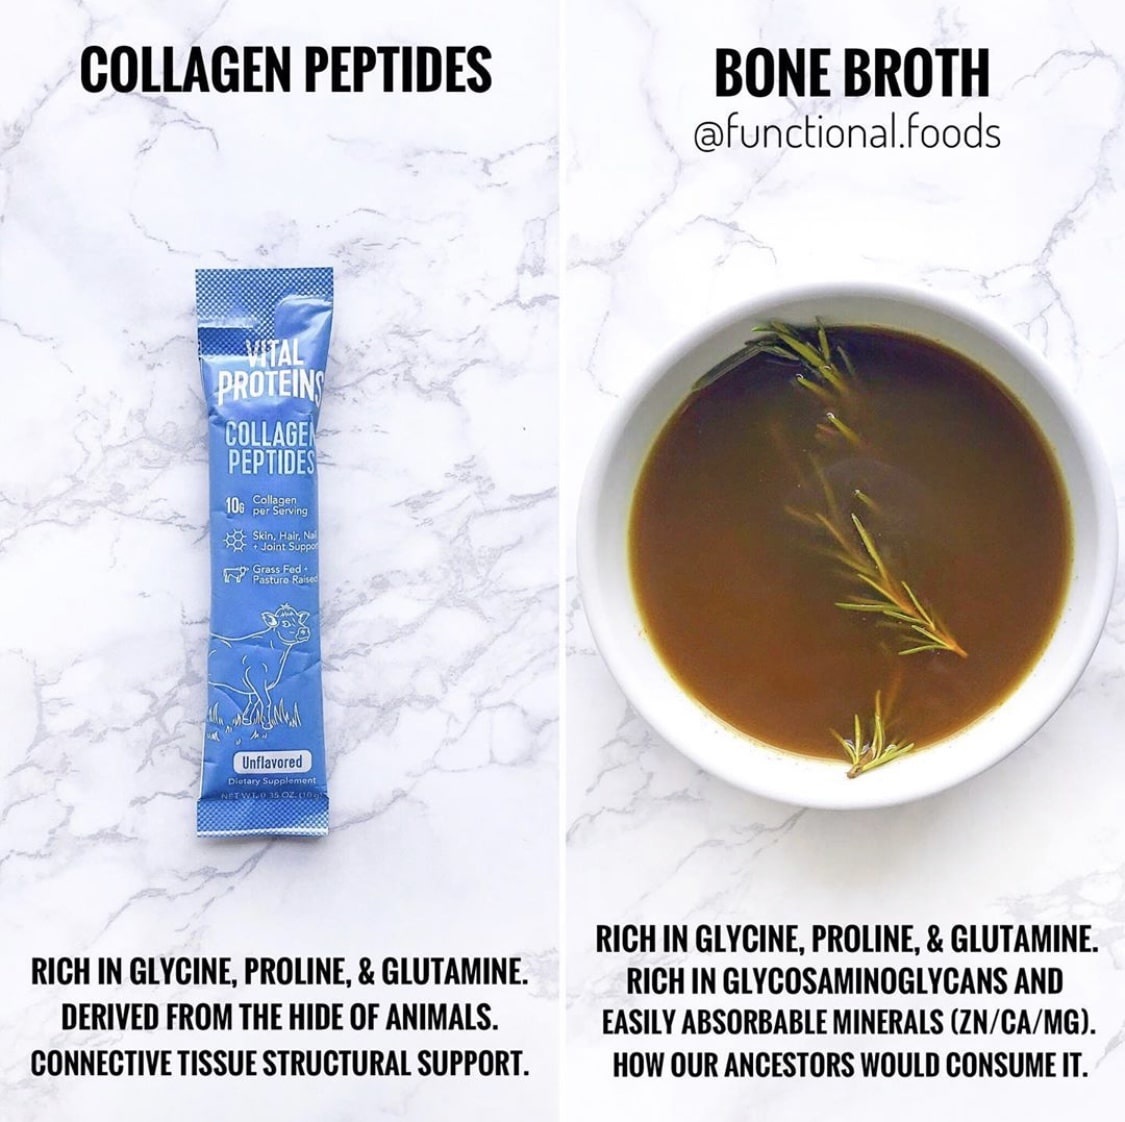 Bone broth and collagen peptides